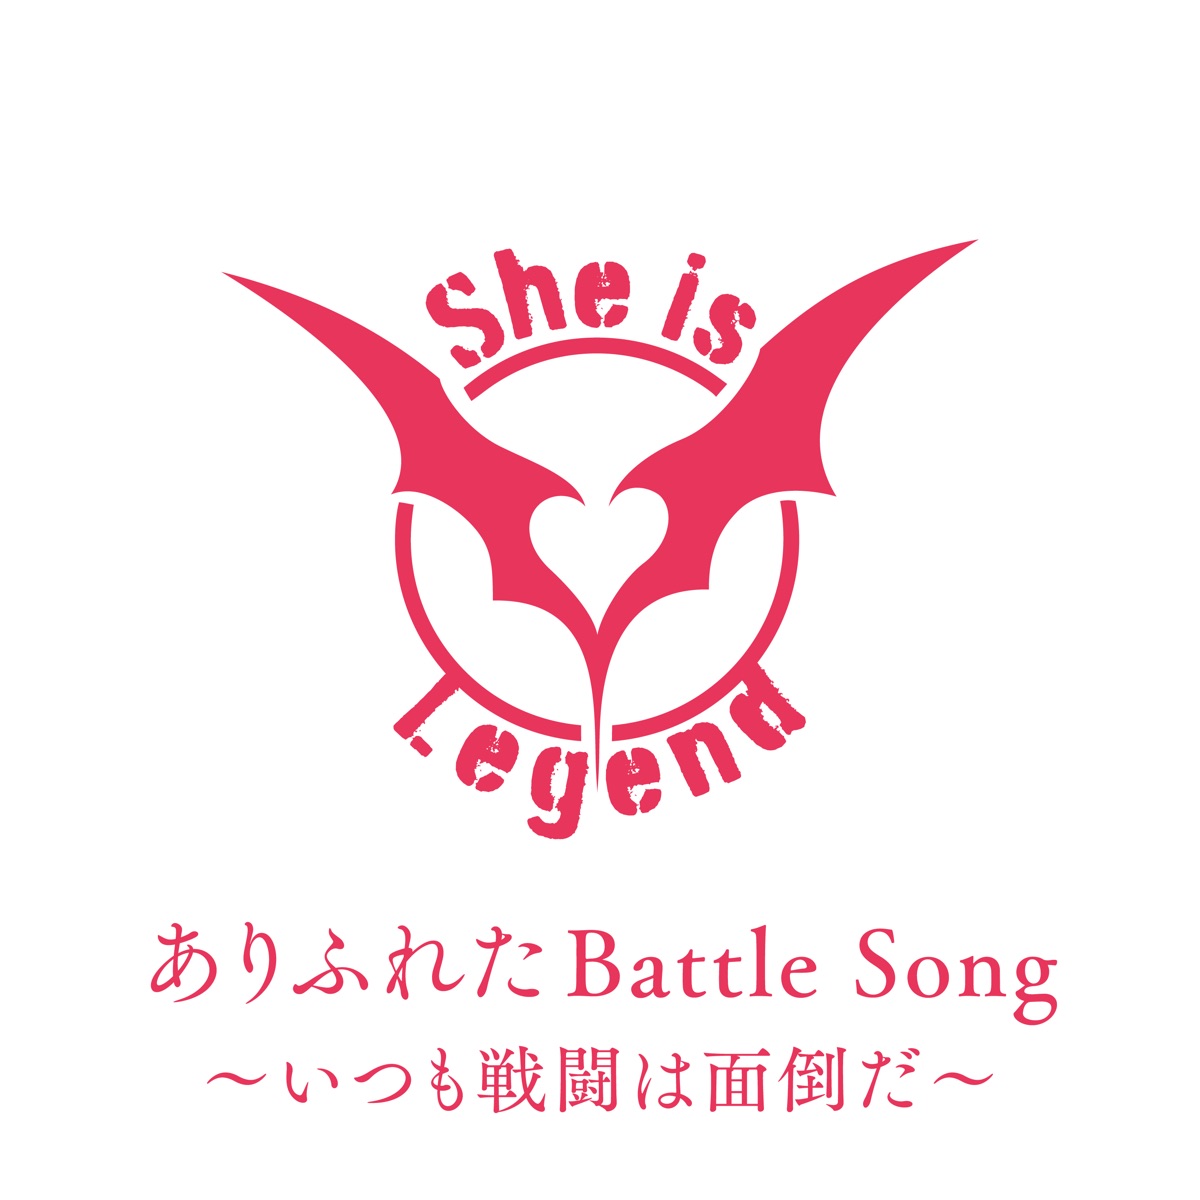 Cover art for『She is Legend - ありふれたBattle Song～いつも戦闘は面倒だ～』from the release『Arifureta Battle Song ~Itsumo Sentou wa Mendou da~